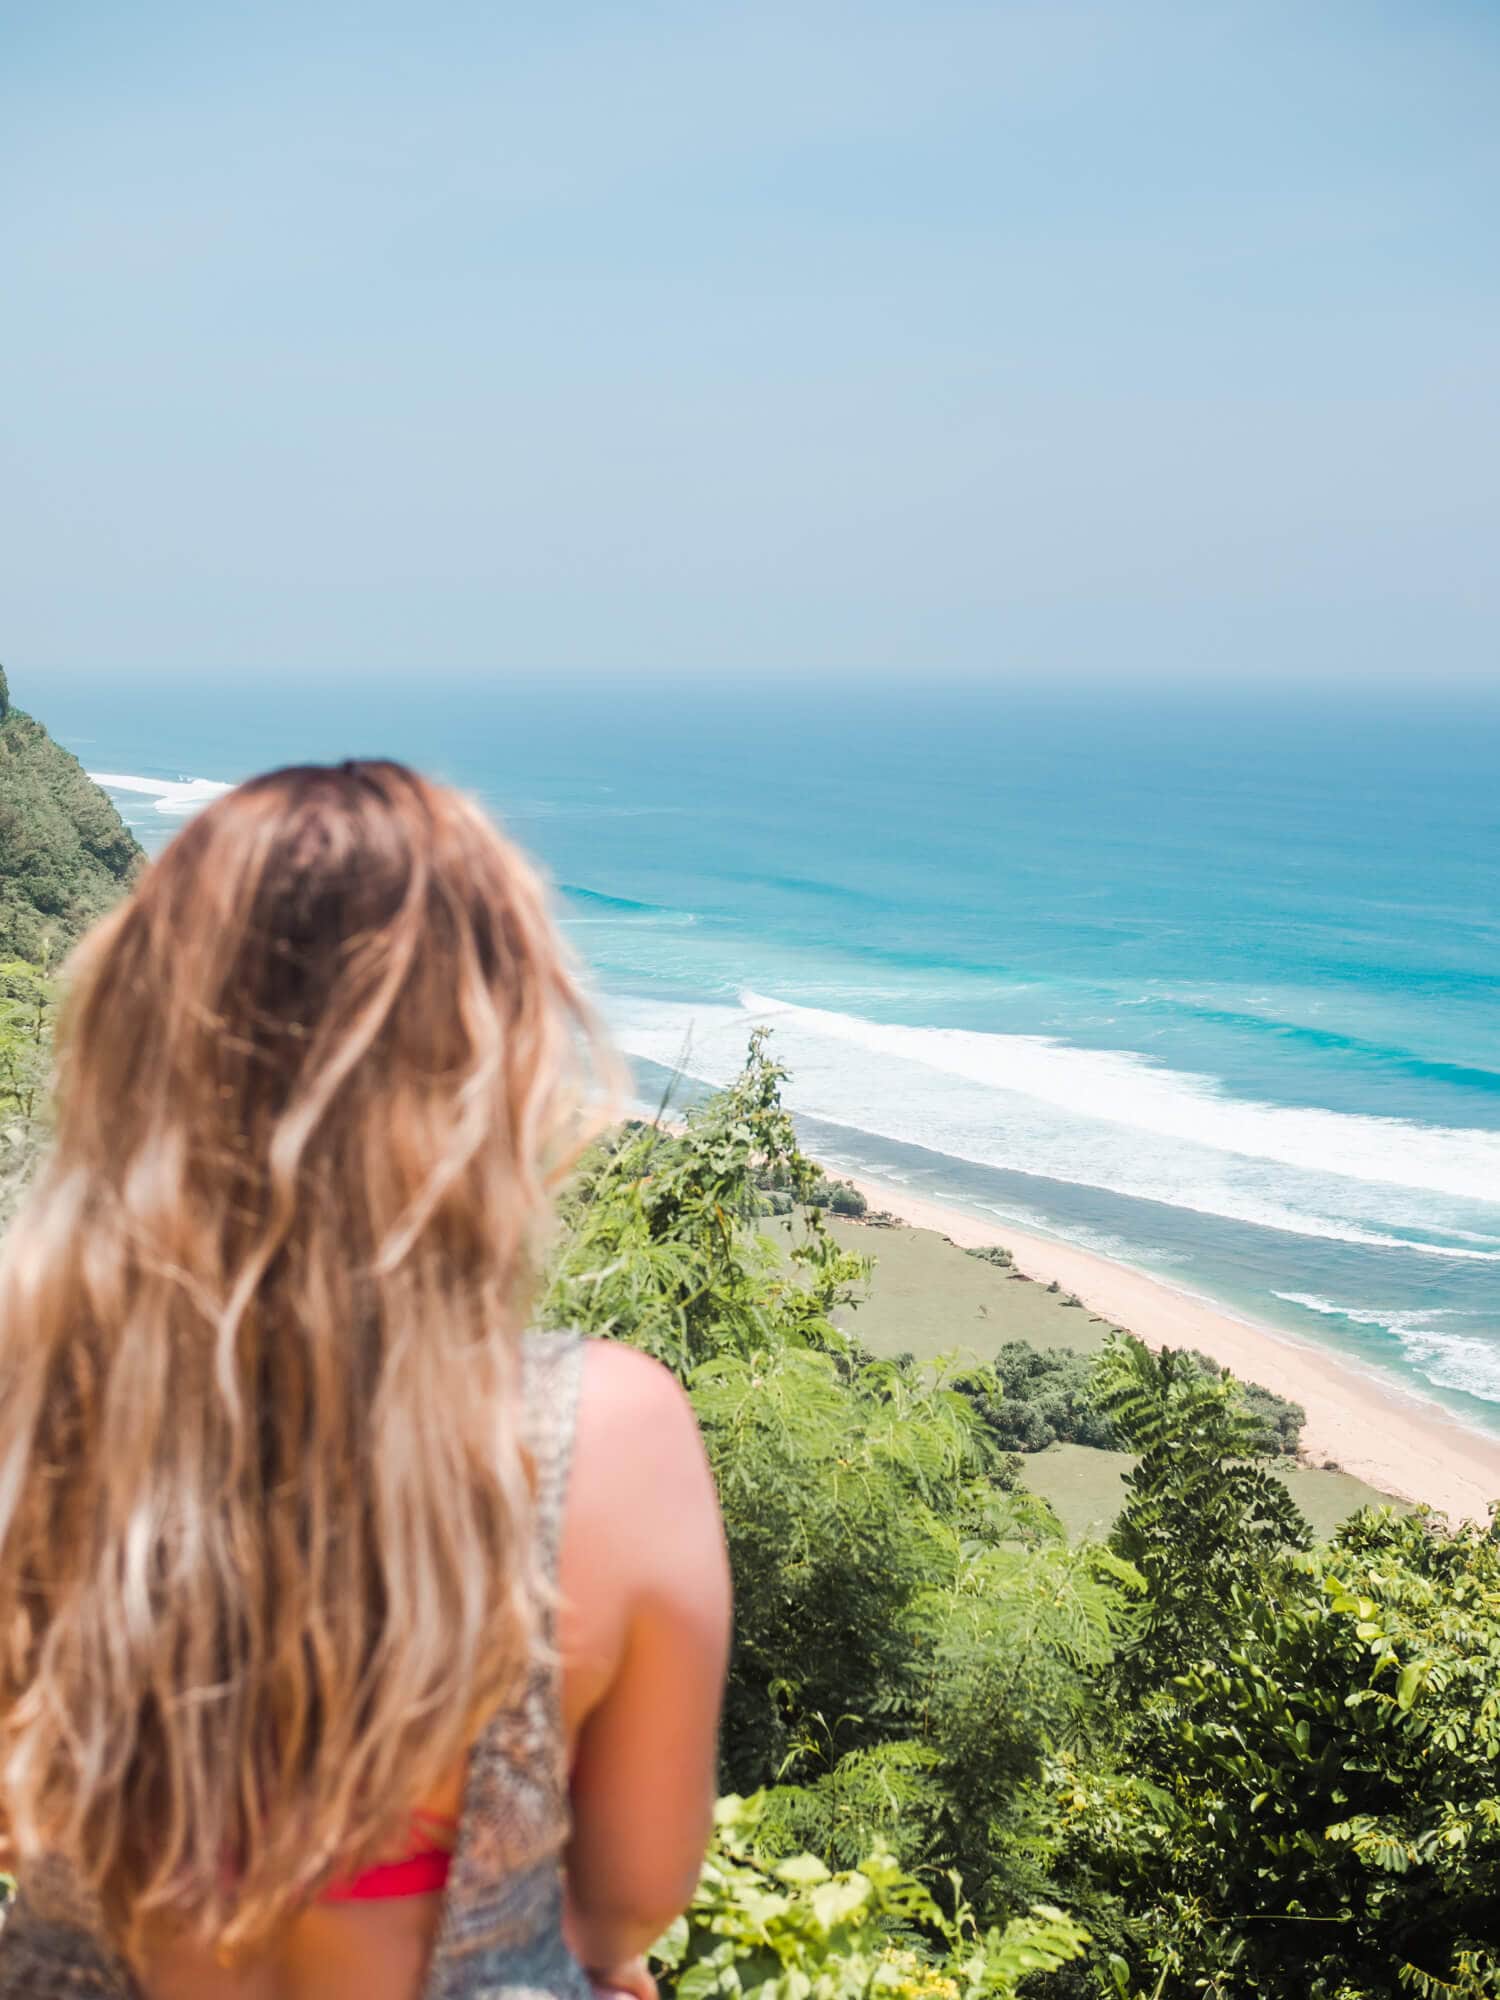 Girl looking out over Nyang Nyang Beach, one of the places you have to include in your Bali Bucket List